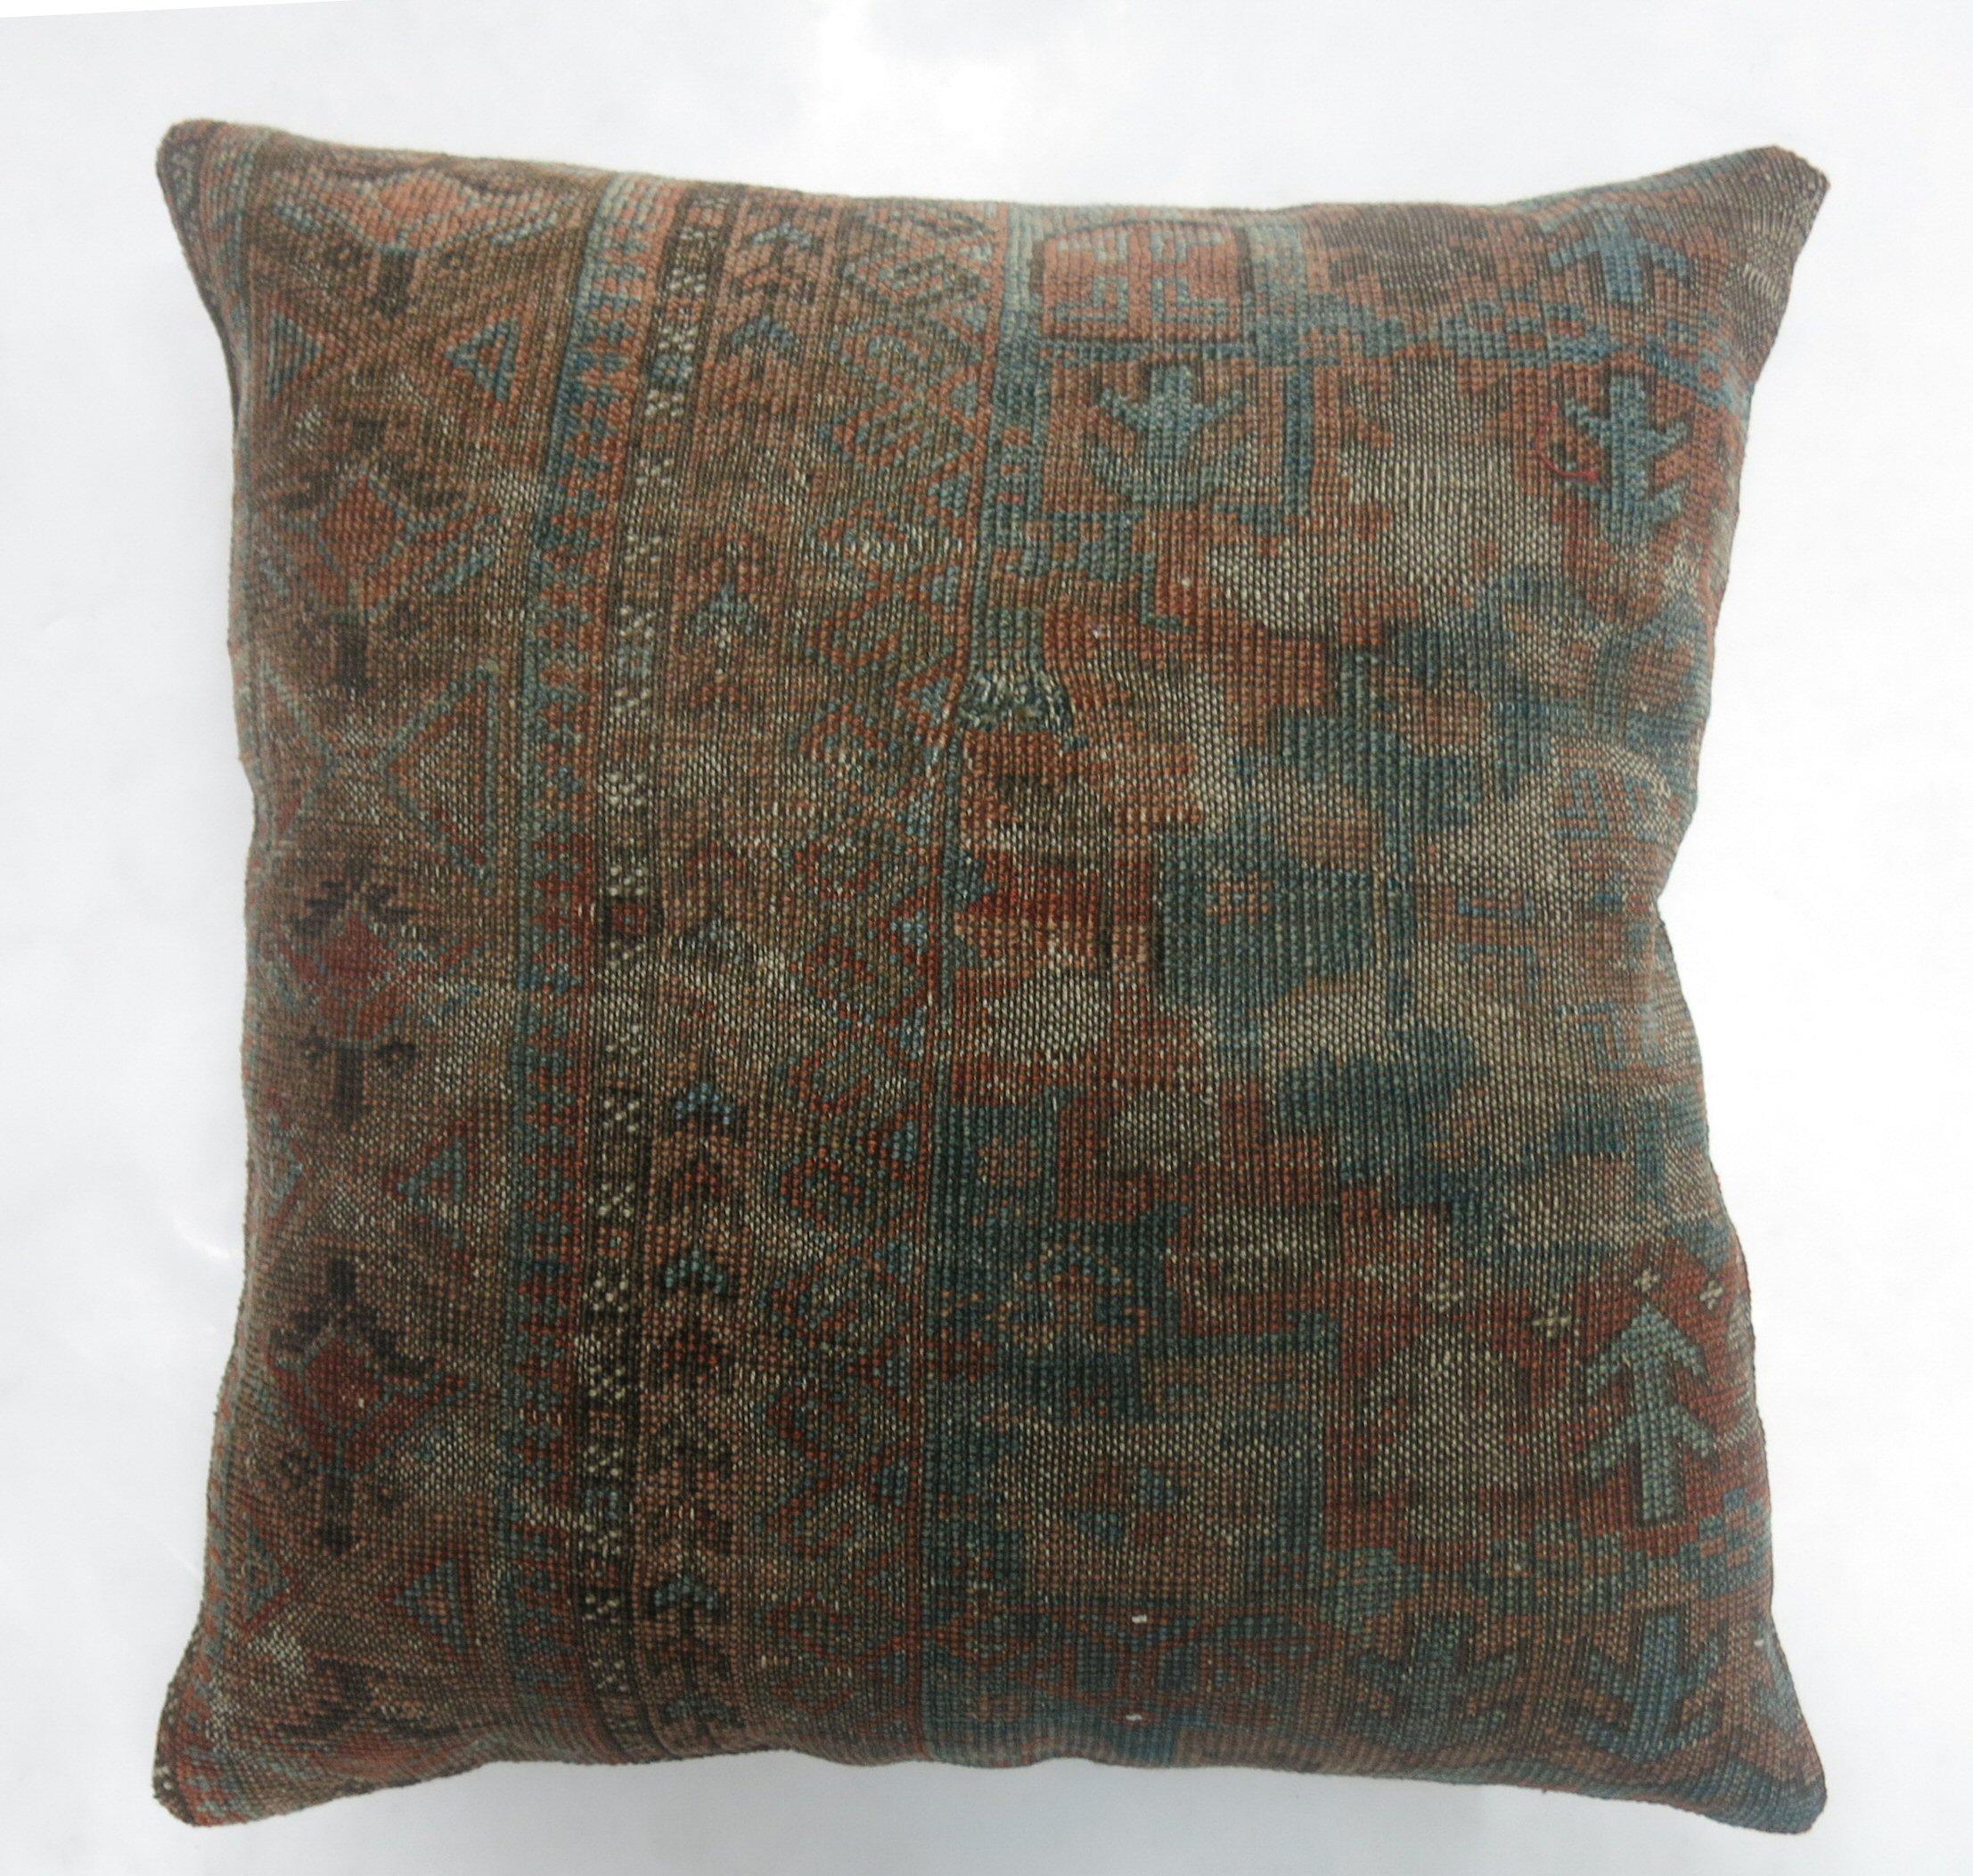 Pillow made from a 19th-century antique Ersari rug in blue and brown with cotton back.

Measures: 20'' x 20''.